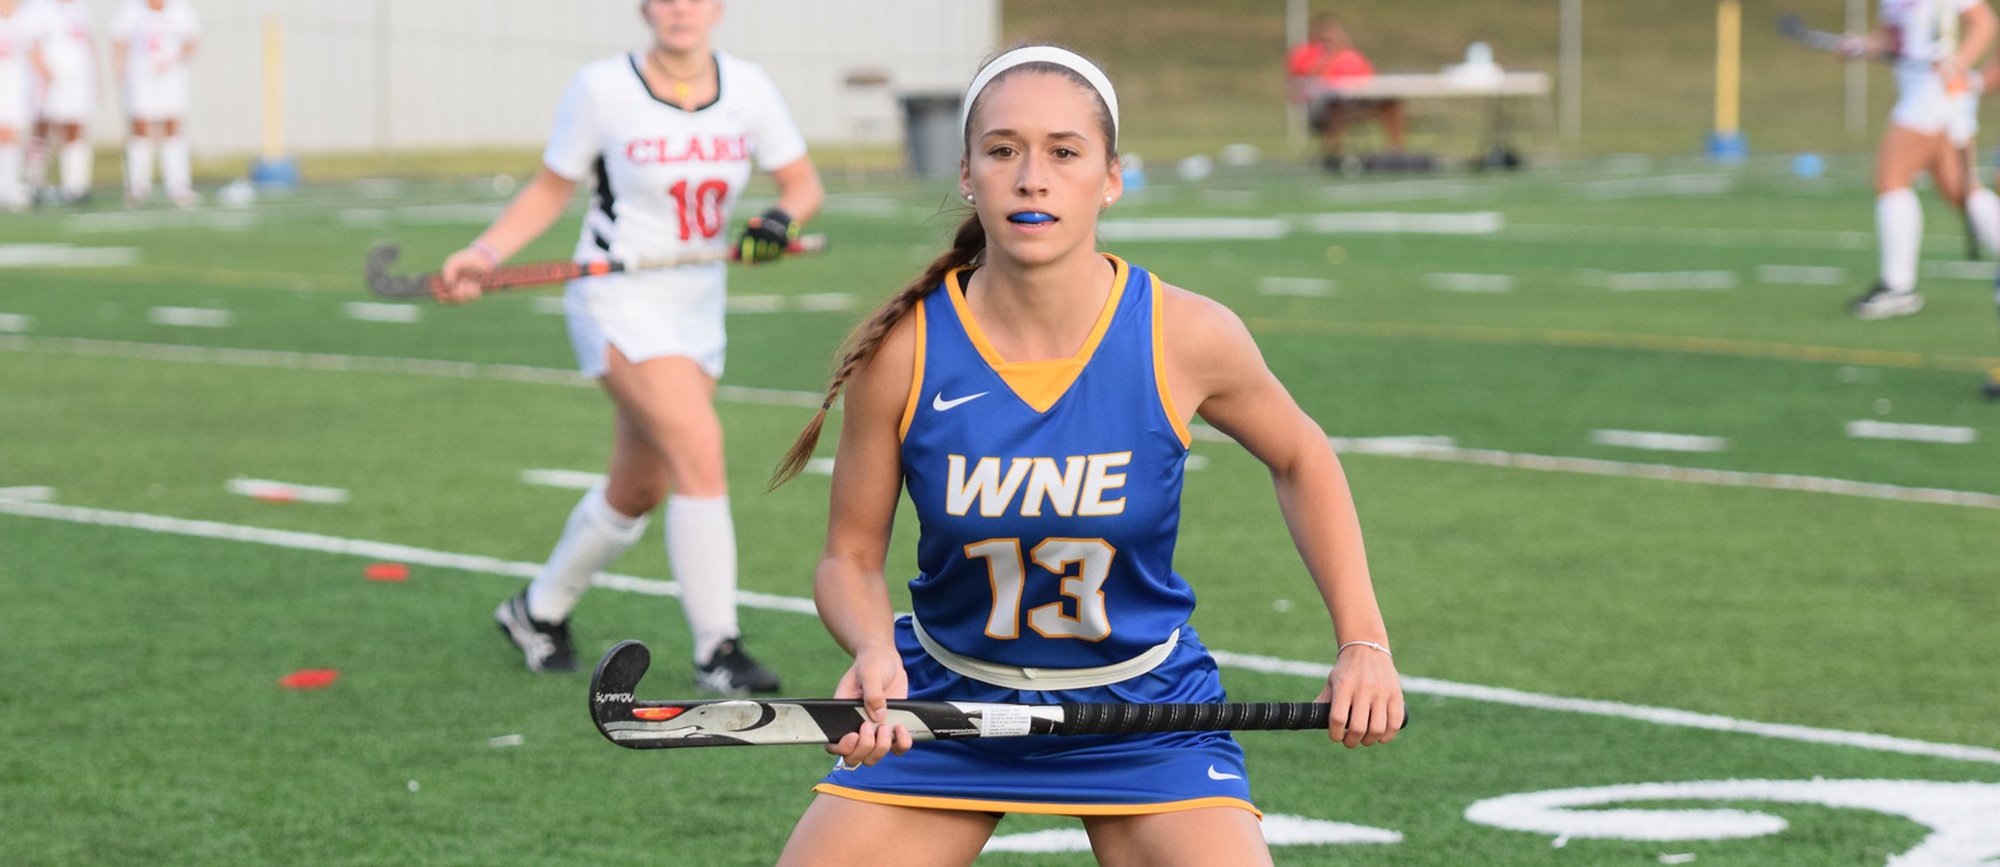 Jackie Clark accounted for one of Western New England's two goals in Wednesday's loss to Roger Williams. (Photo by Rachael Margossian)